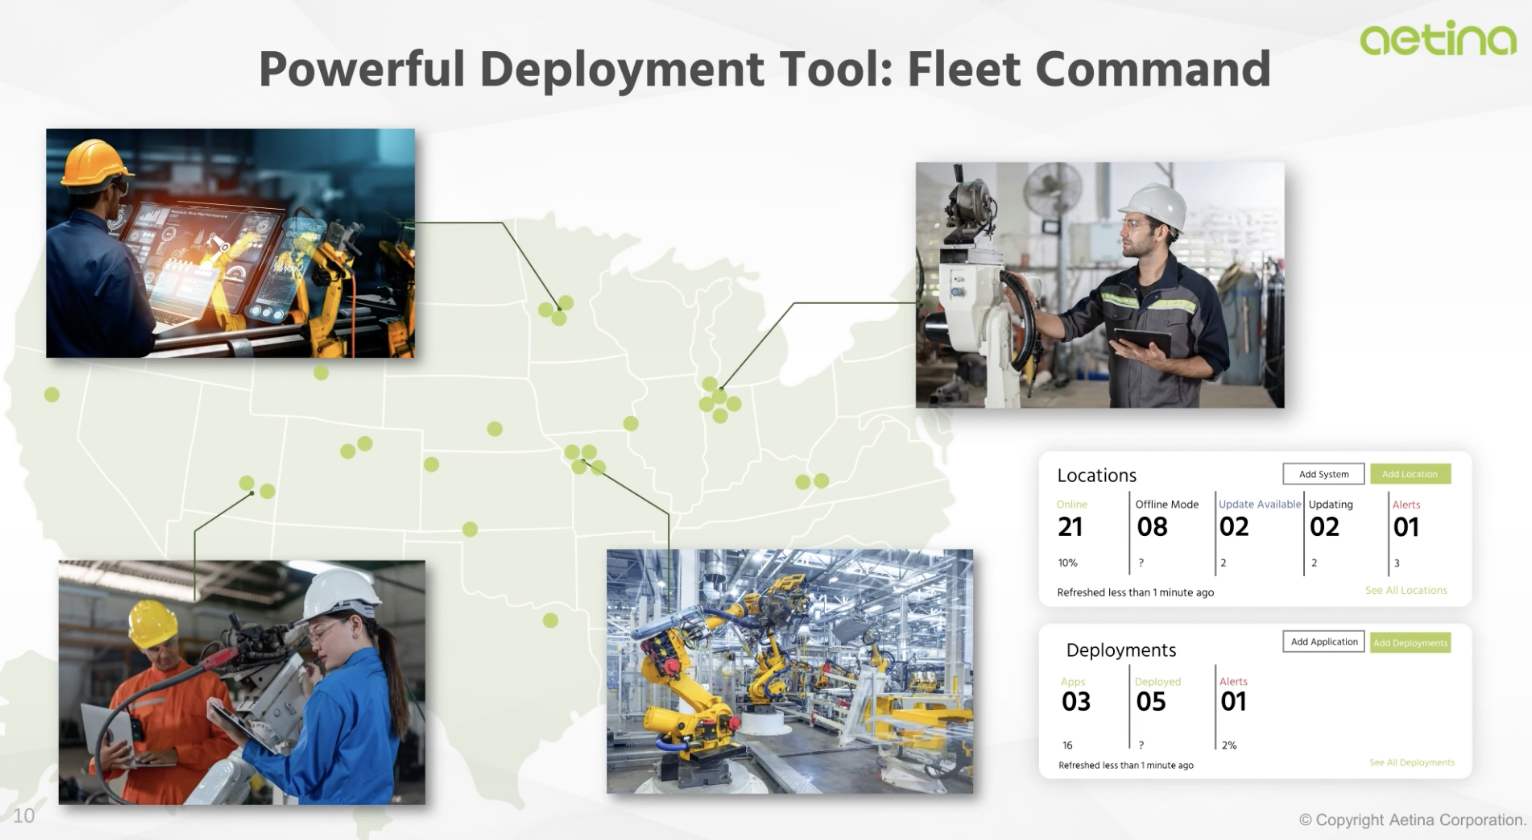 A collage showing industrial images of factory workers and robotics where Fleet Command is used. 